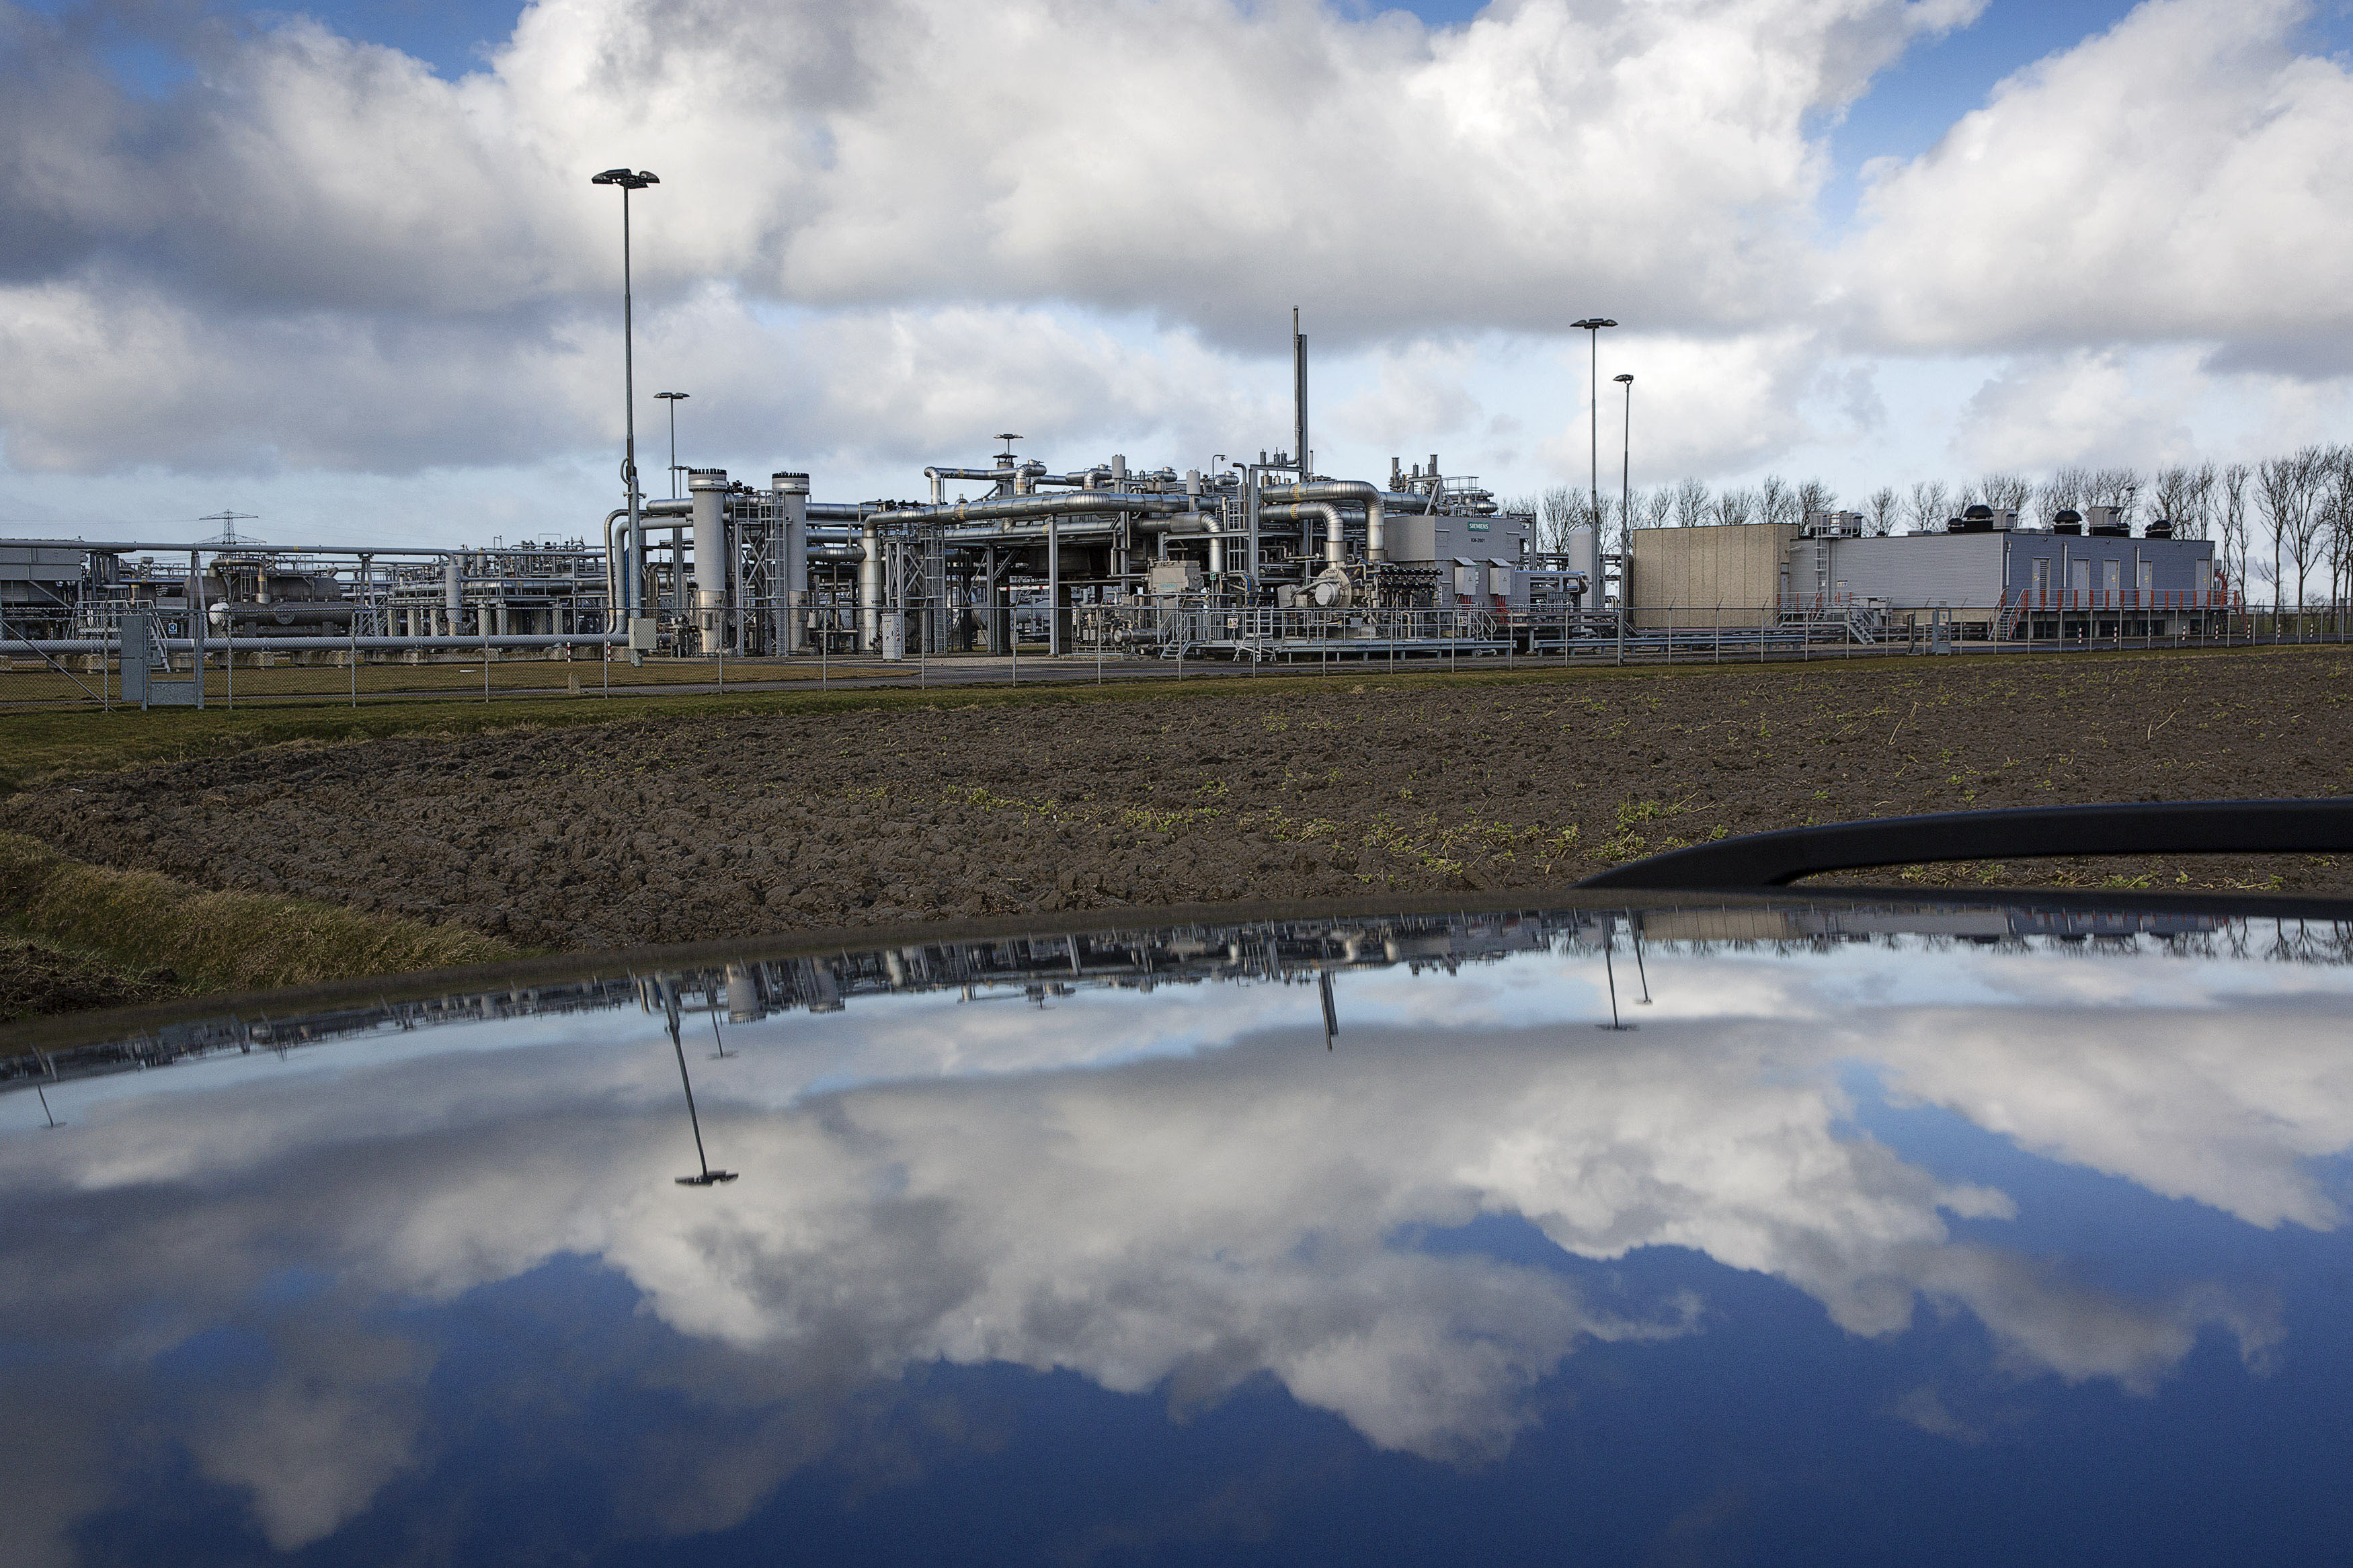 A view of a gas production plant is reflected in the roof of a car in 't Zand in Groningen